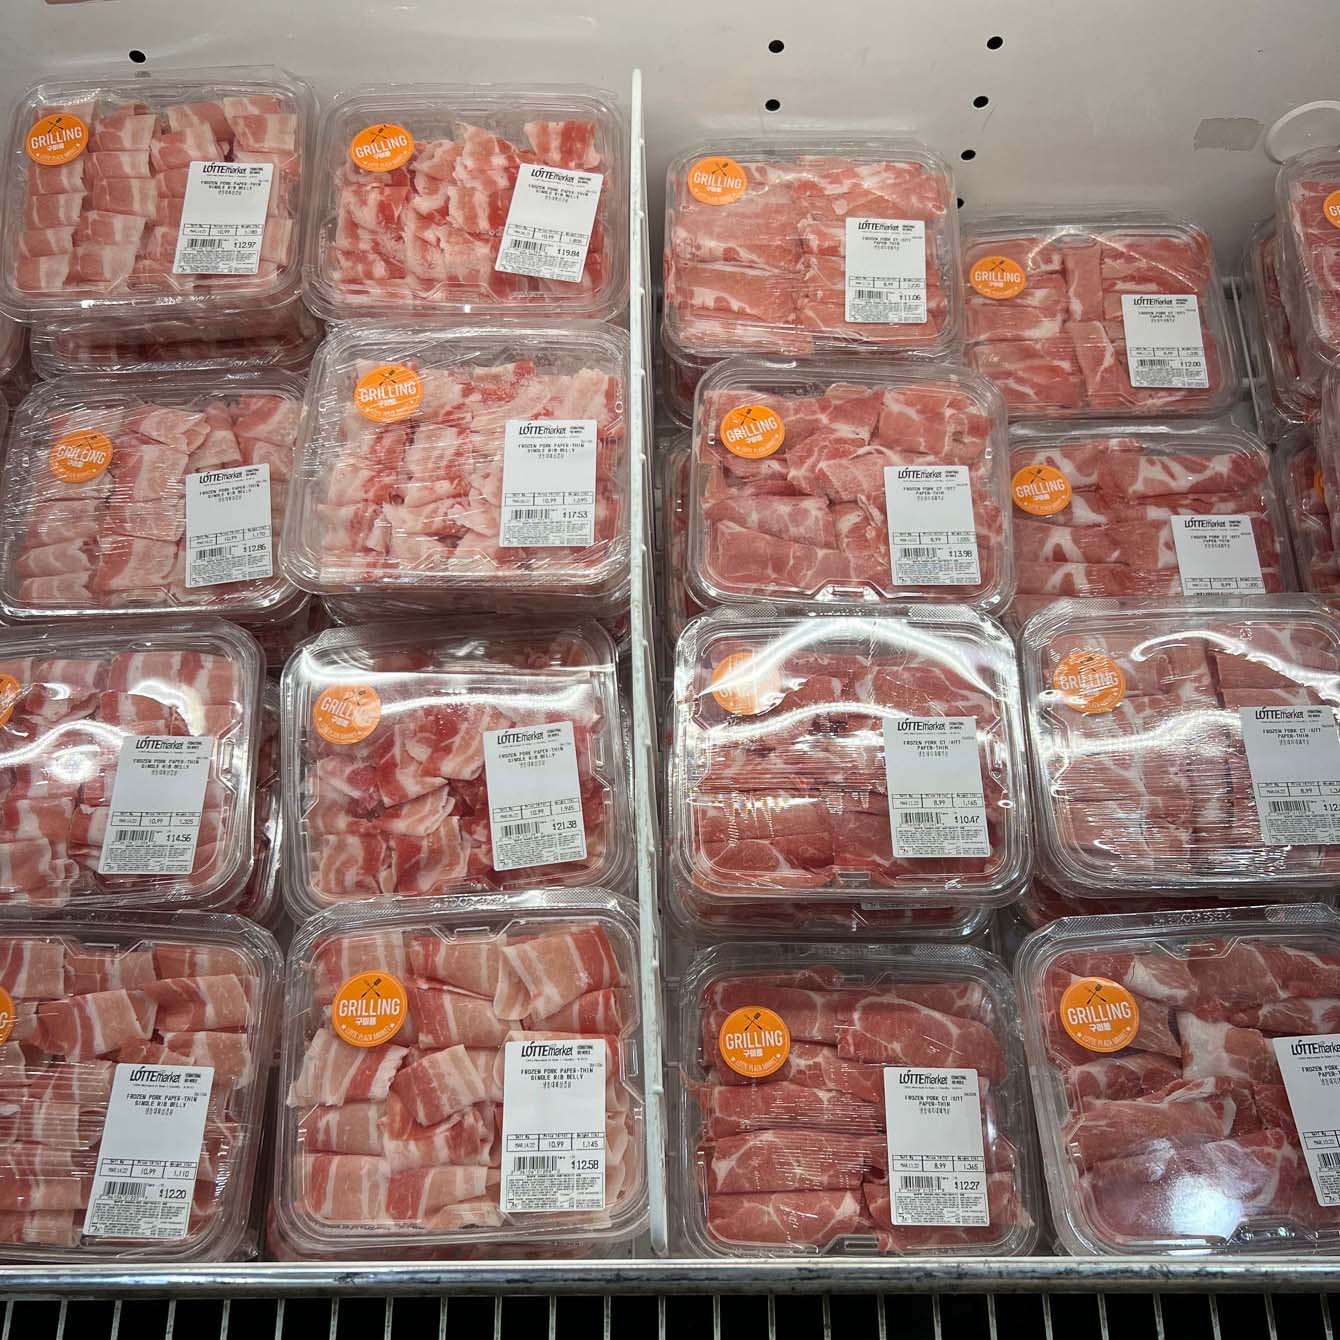 Thin Korean pork belly slices are packed and sold as frozen 